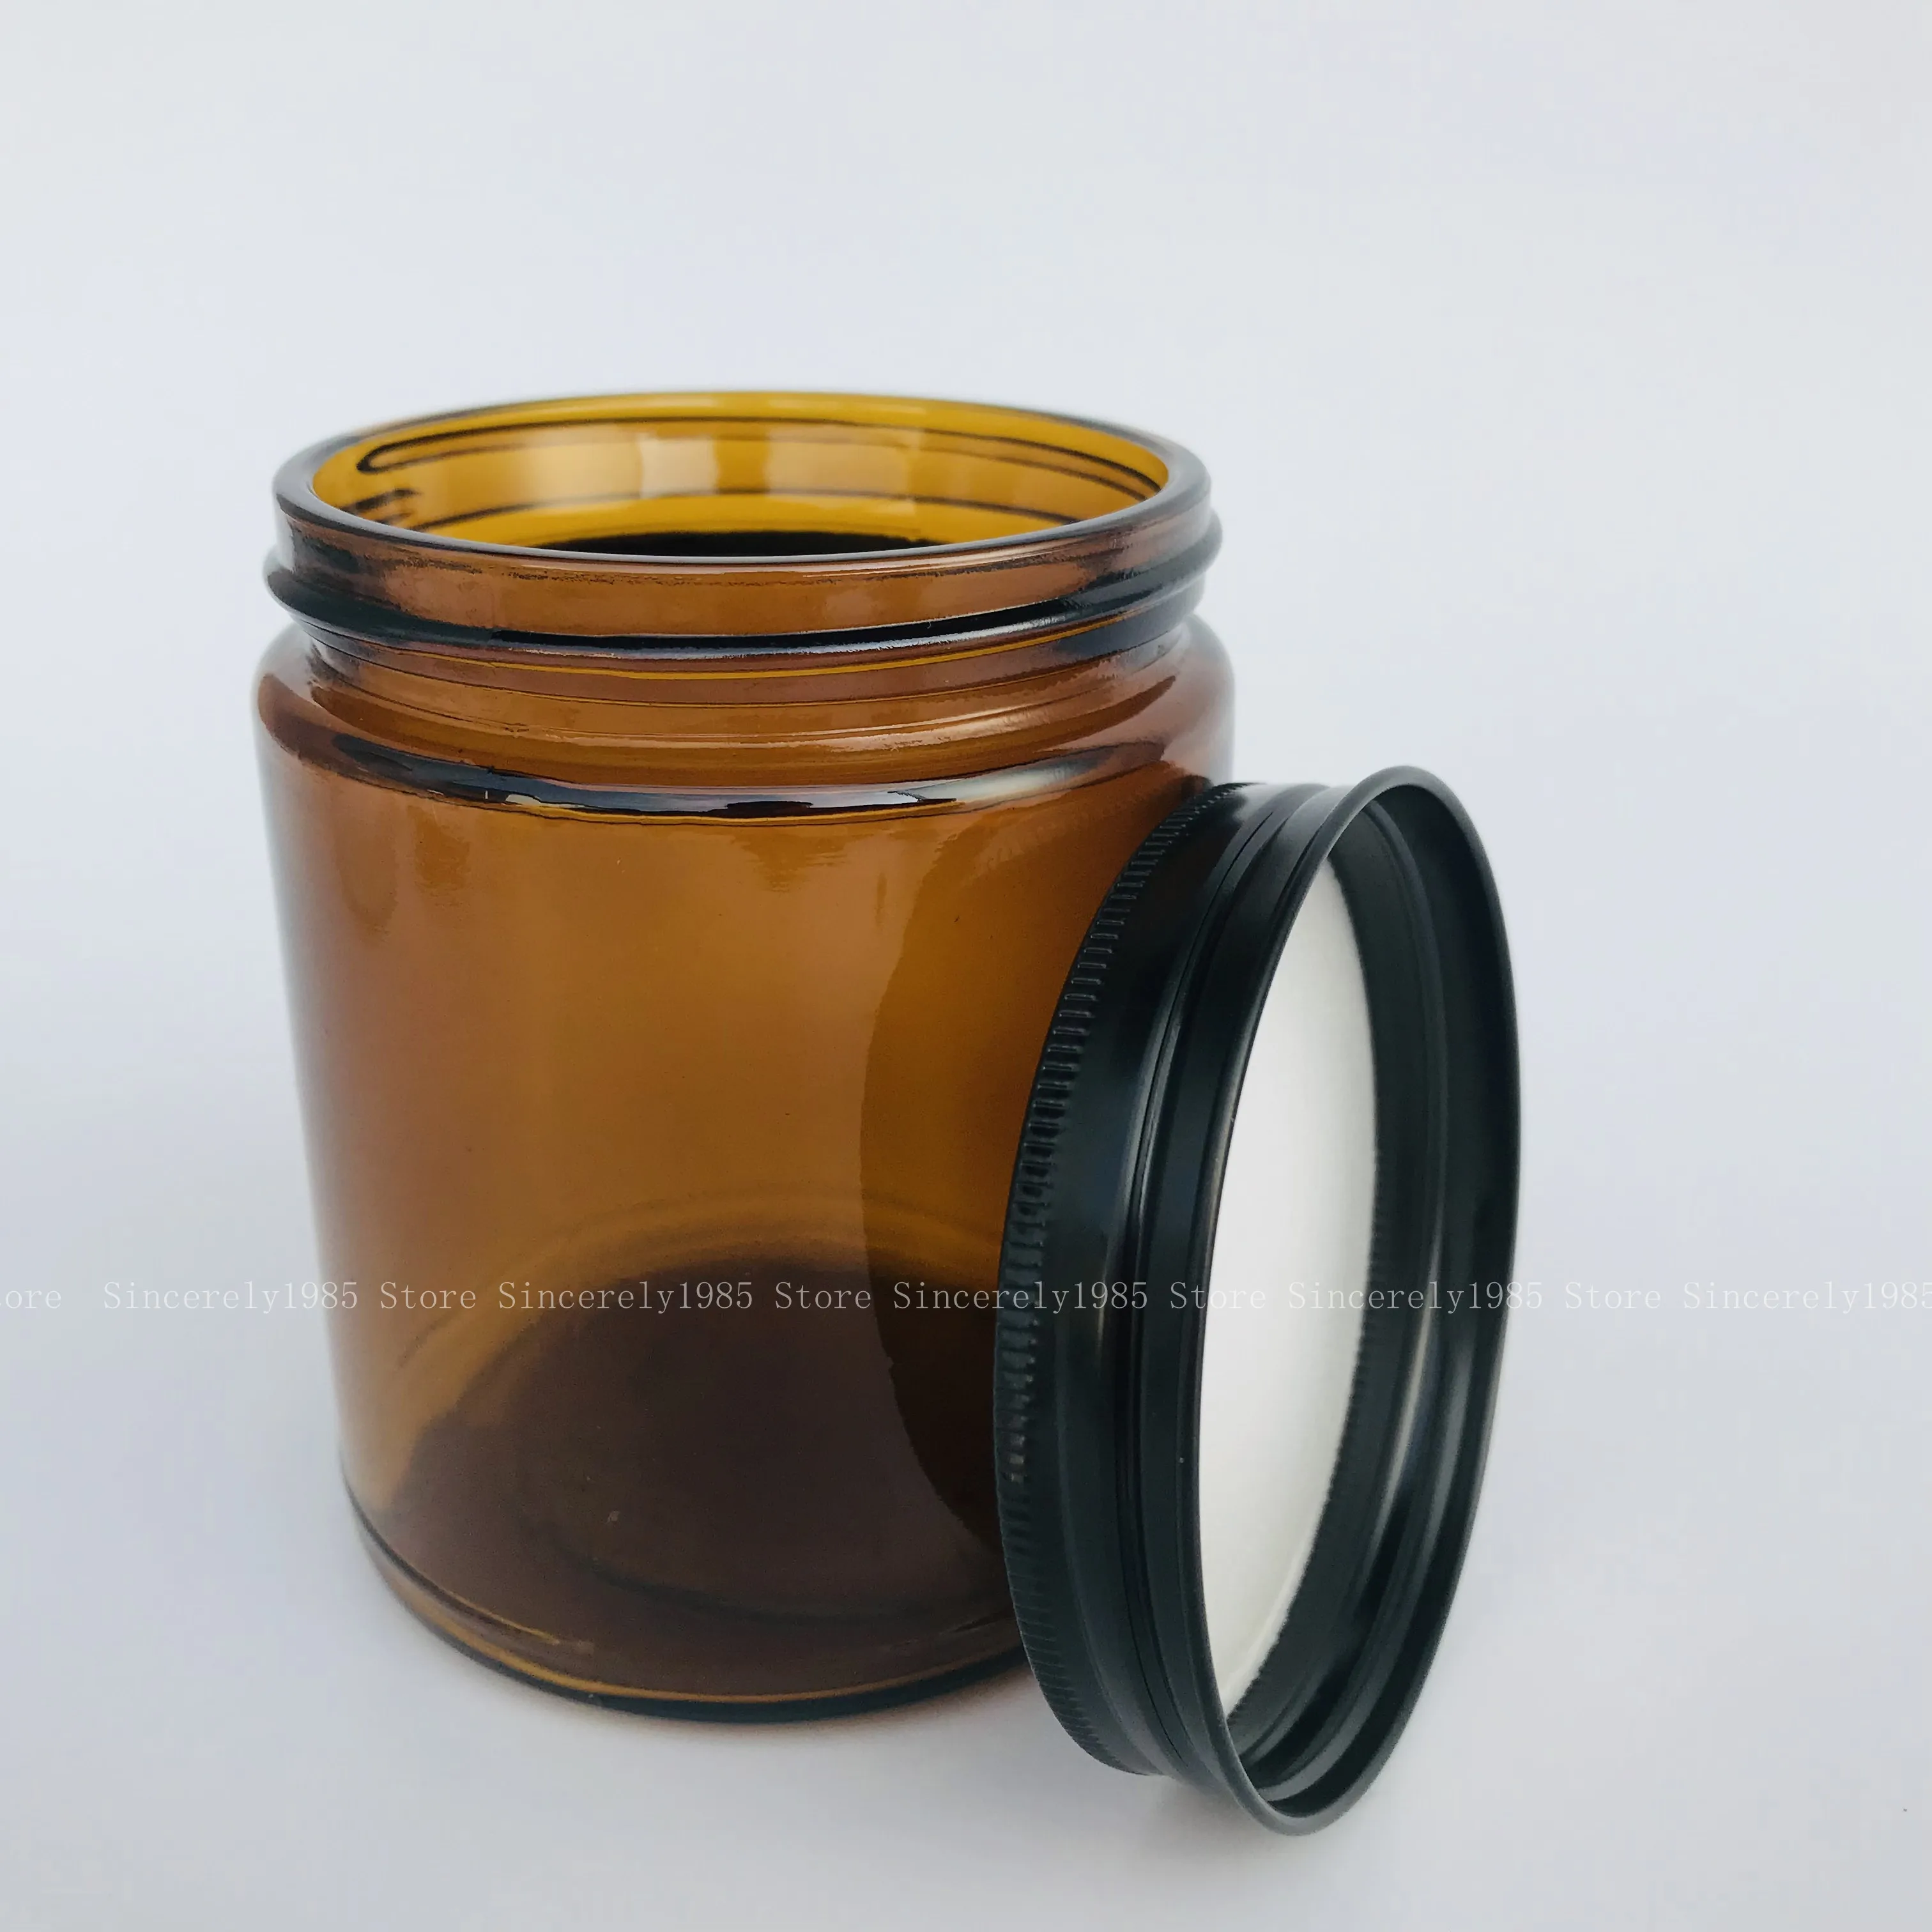 2pcs 250ml Amber Glass Candle Jars Empty Round Cosmetic Jar for DIY Aromatherapy Wax Melts Candles Salve Lotion Cream Storage